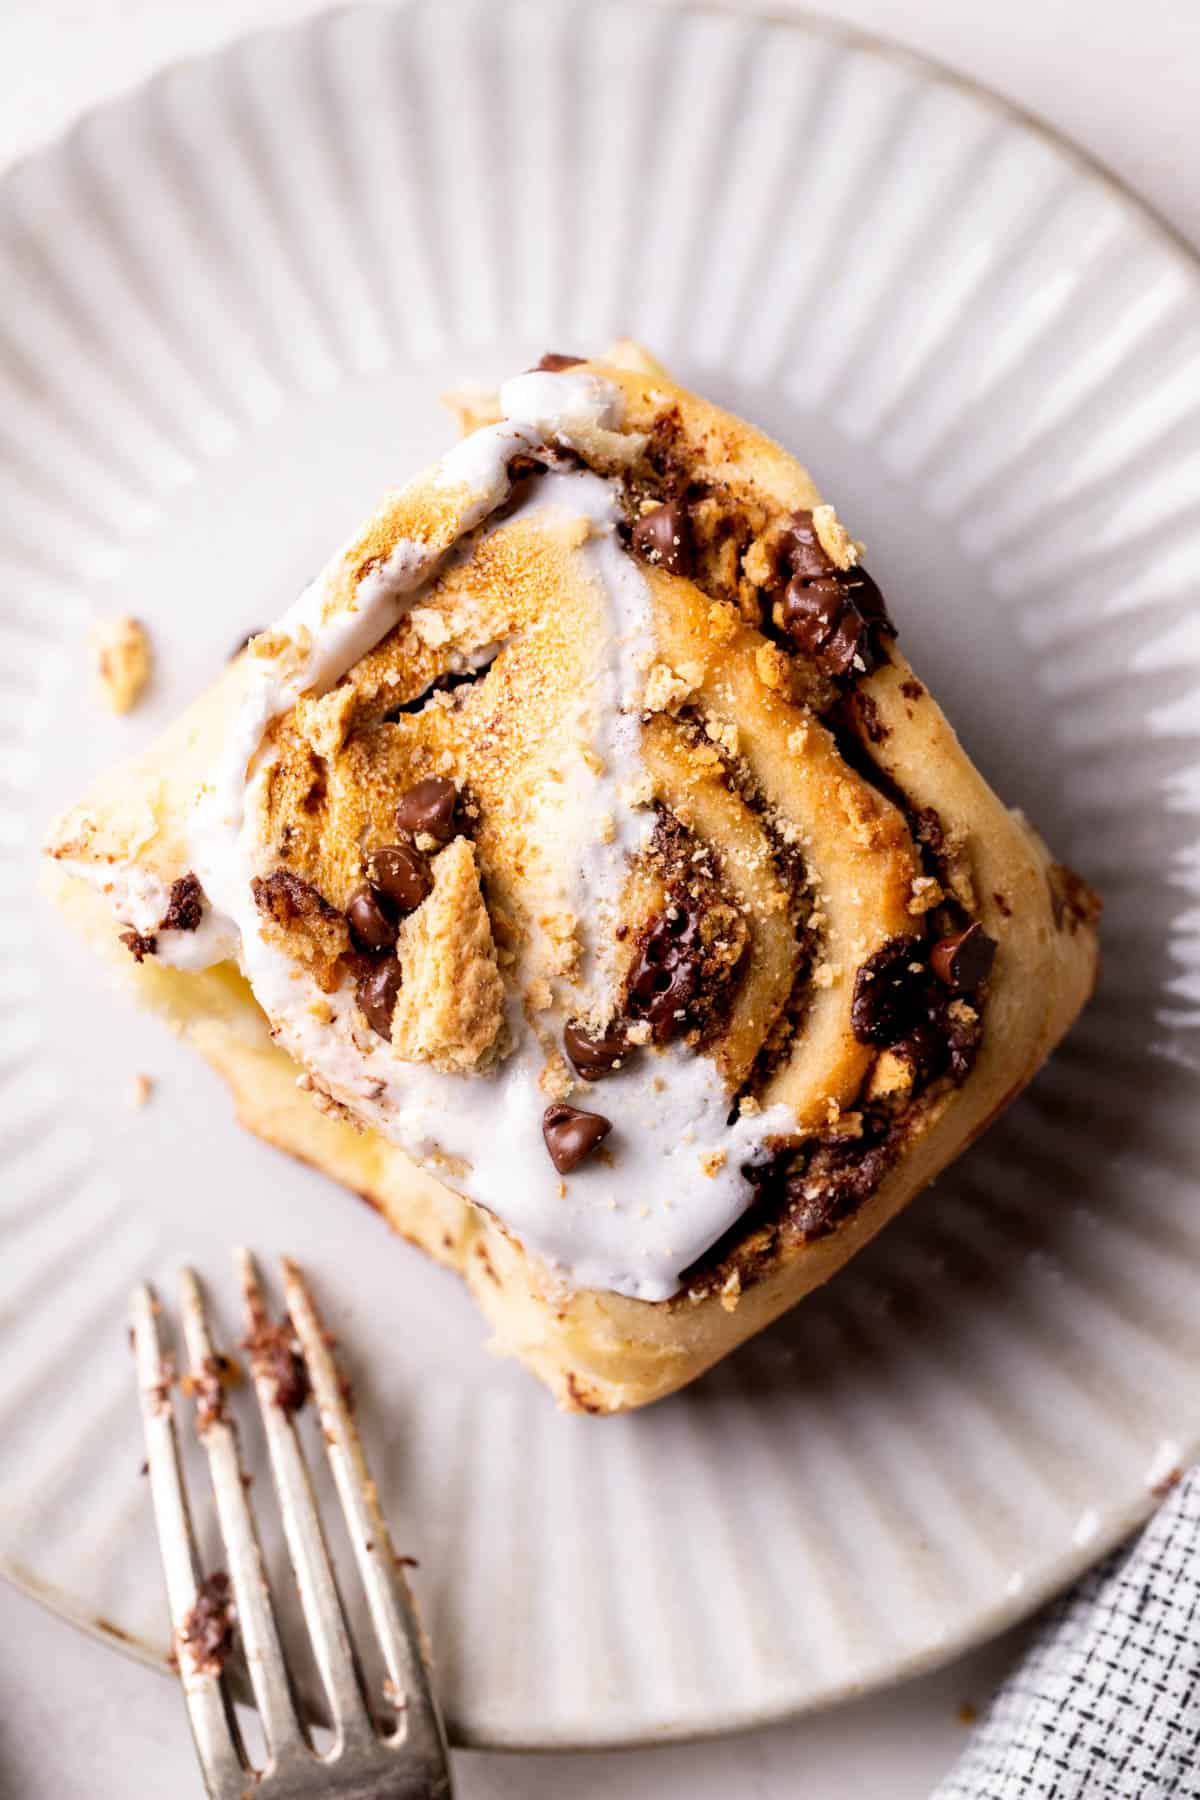 One cinnamon roll on a plate.